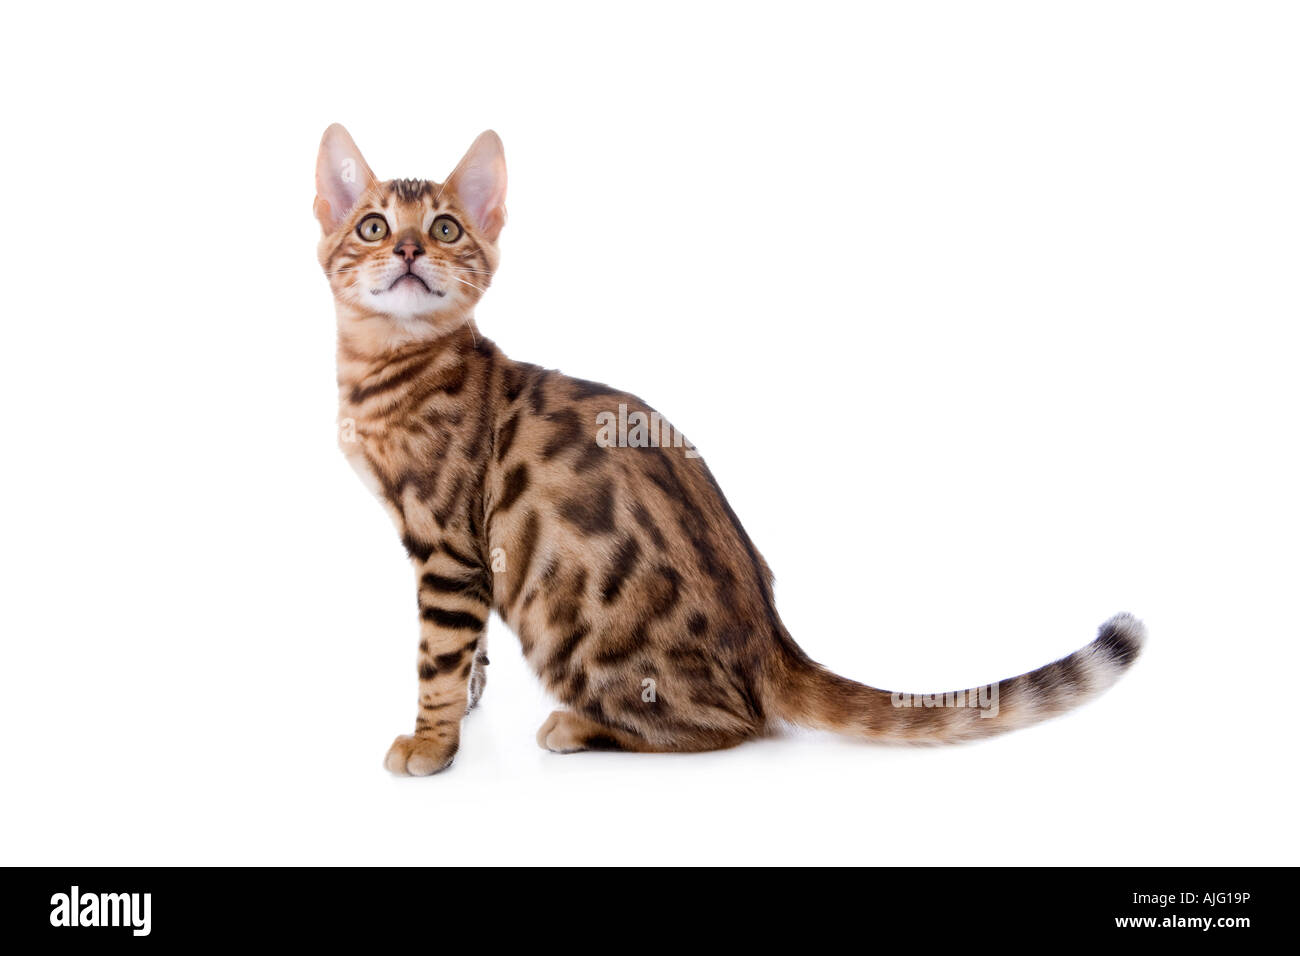 Bengal kitten side view isolated on white background Stock Photo